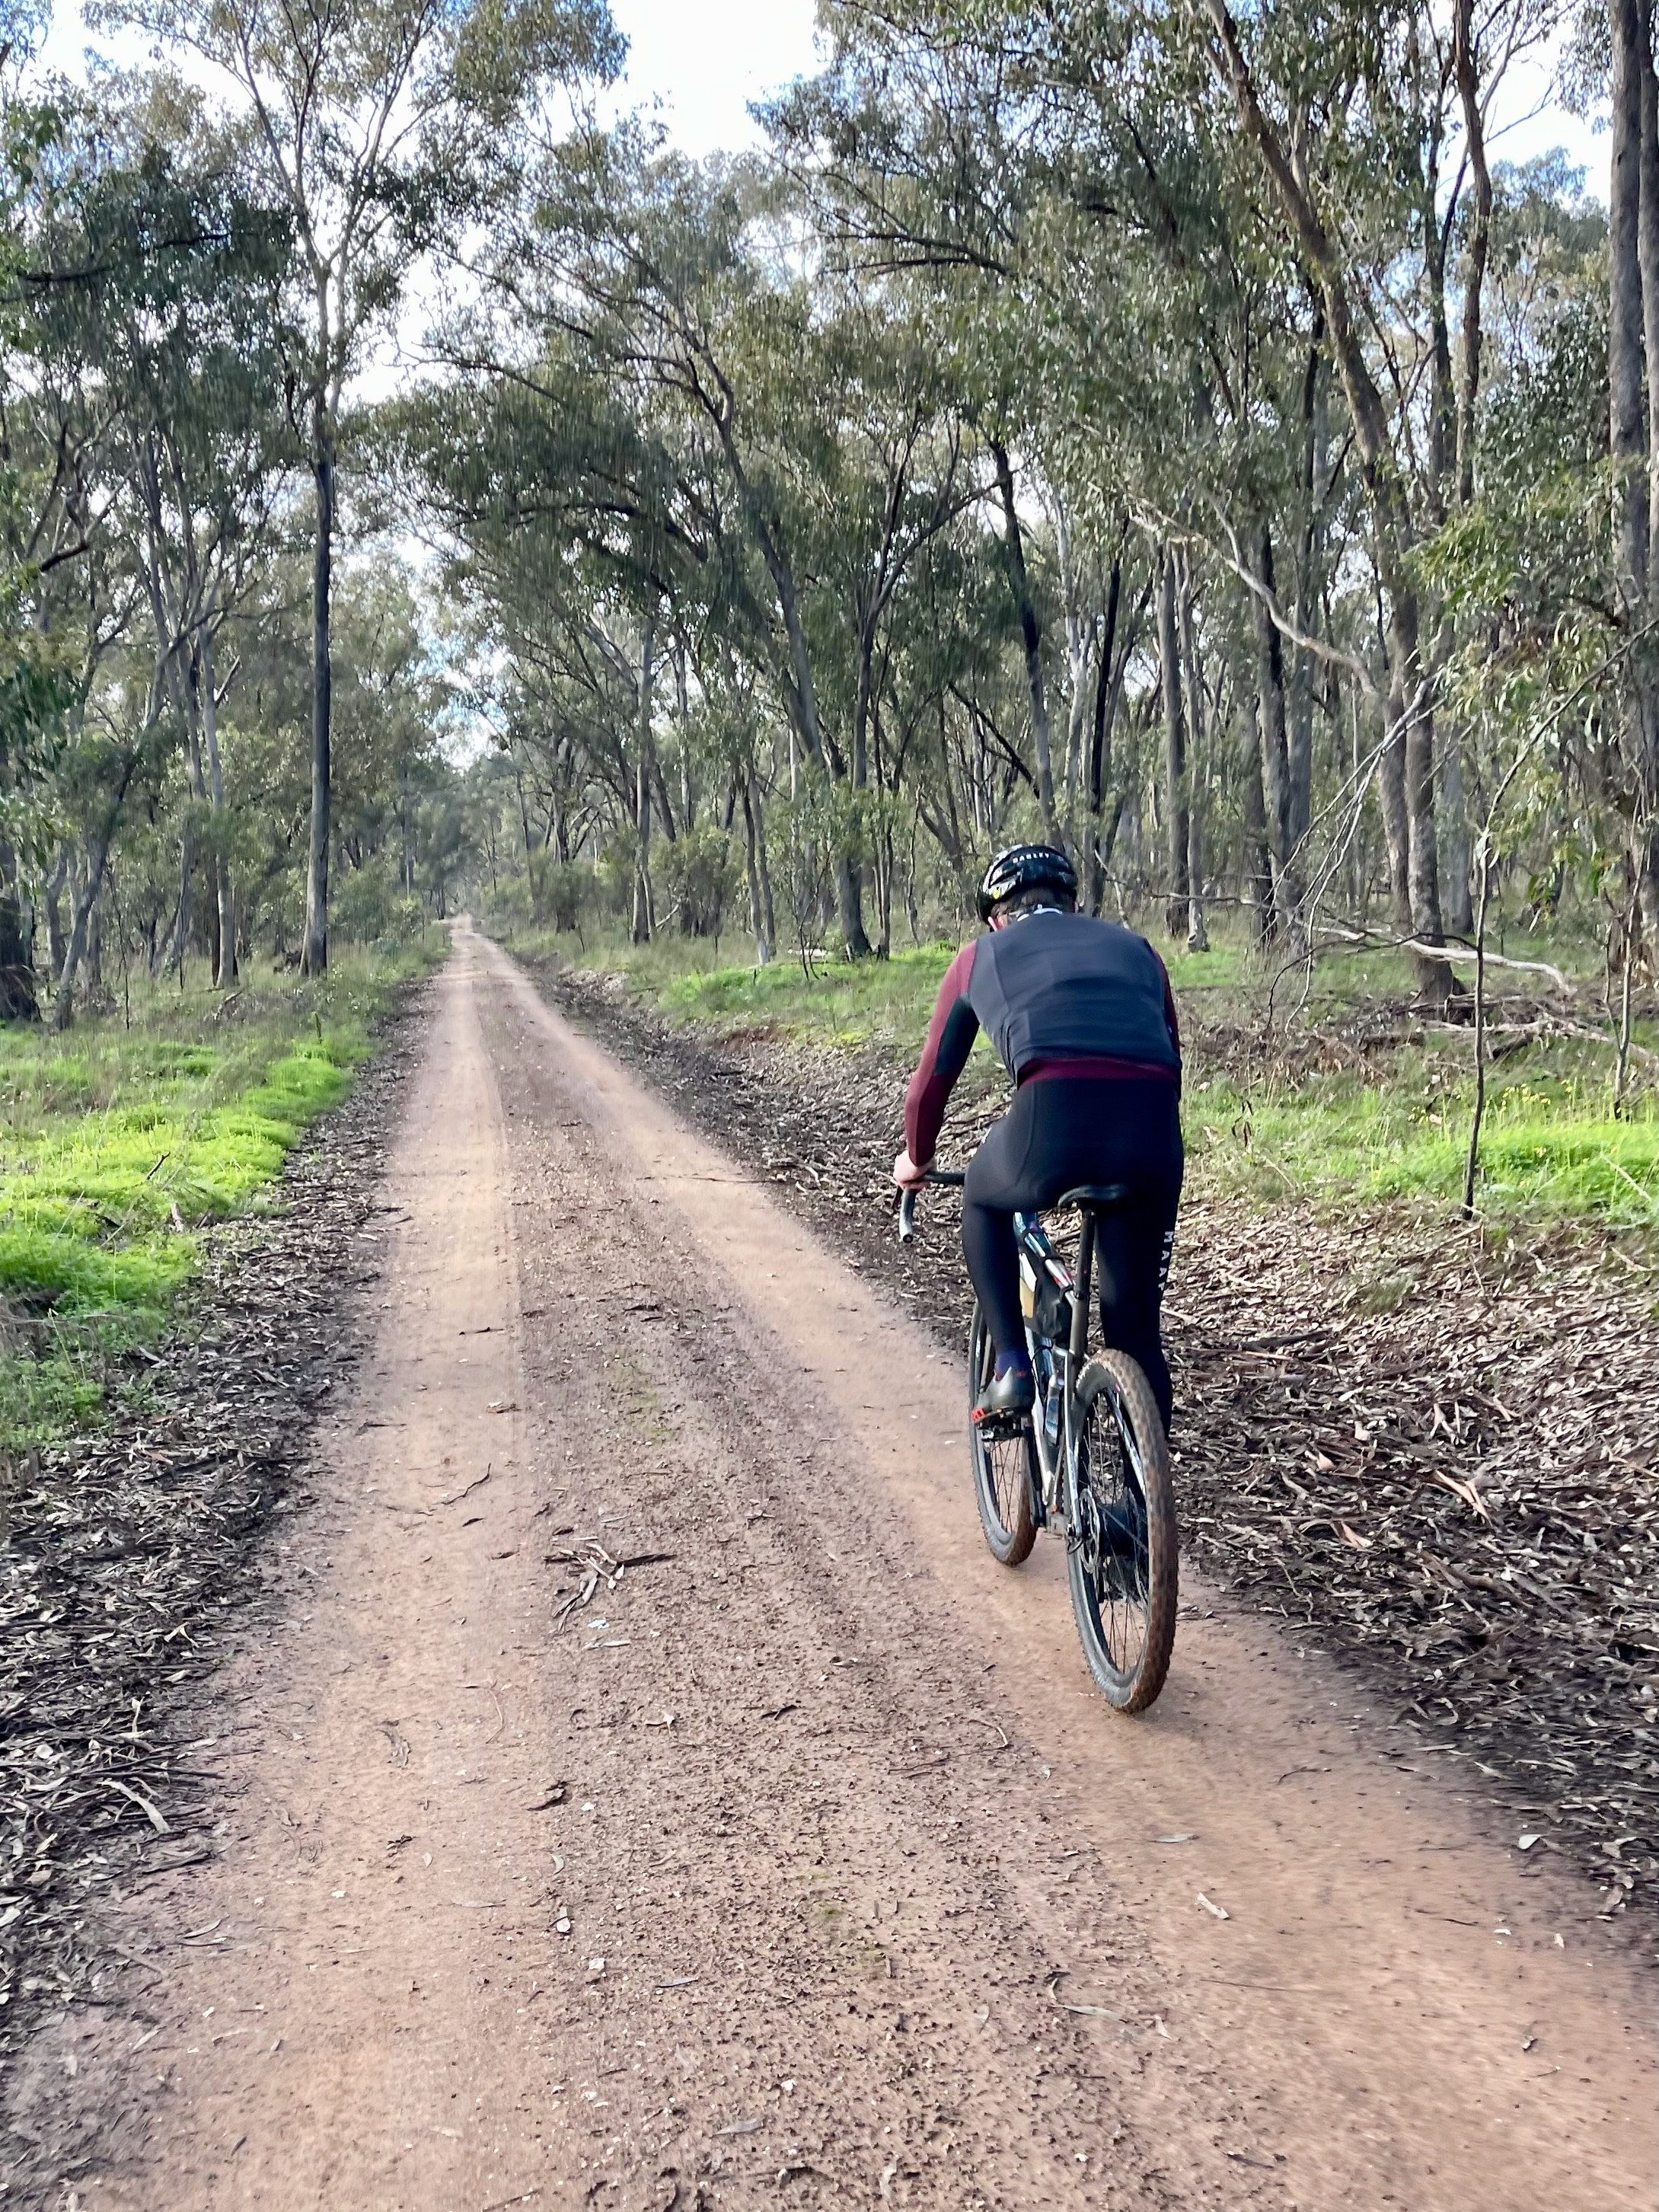 A long straight smooth gravel road with a cyclist riding through a native forest 